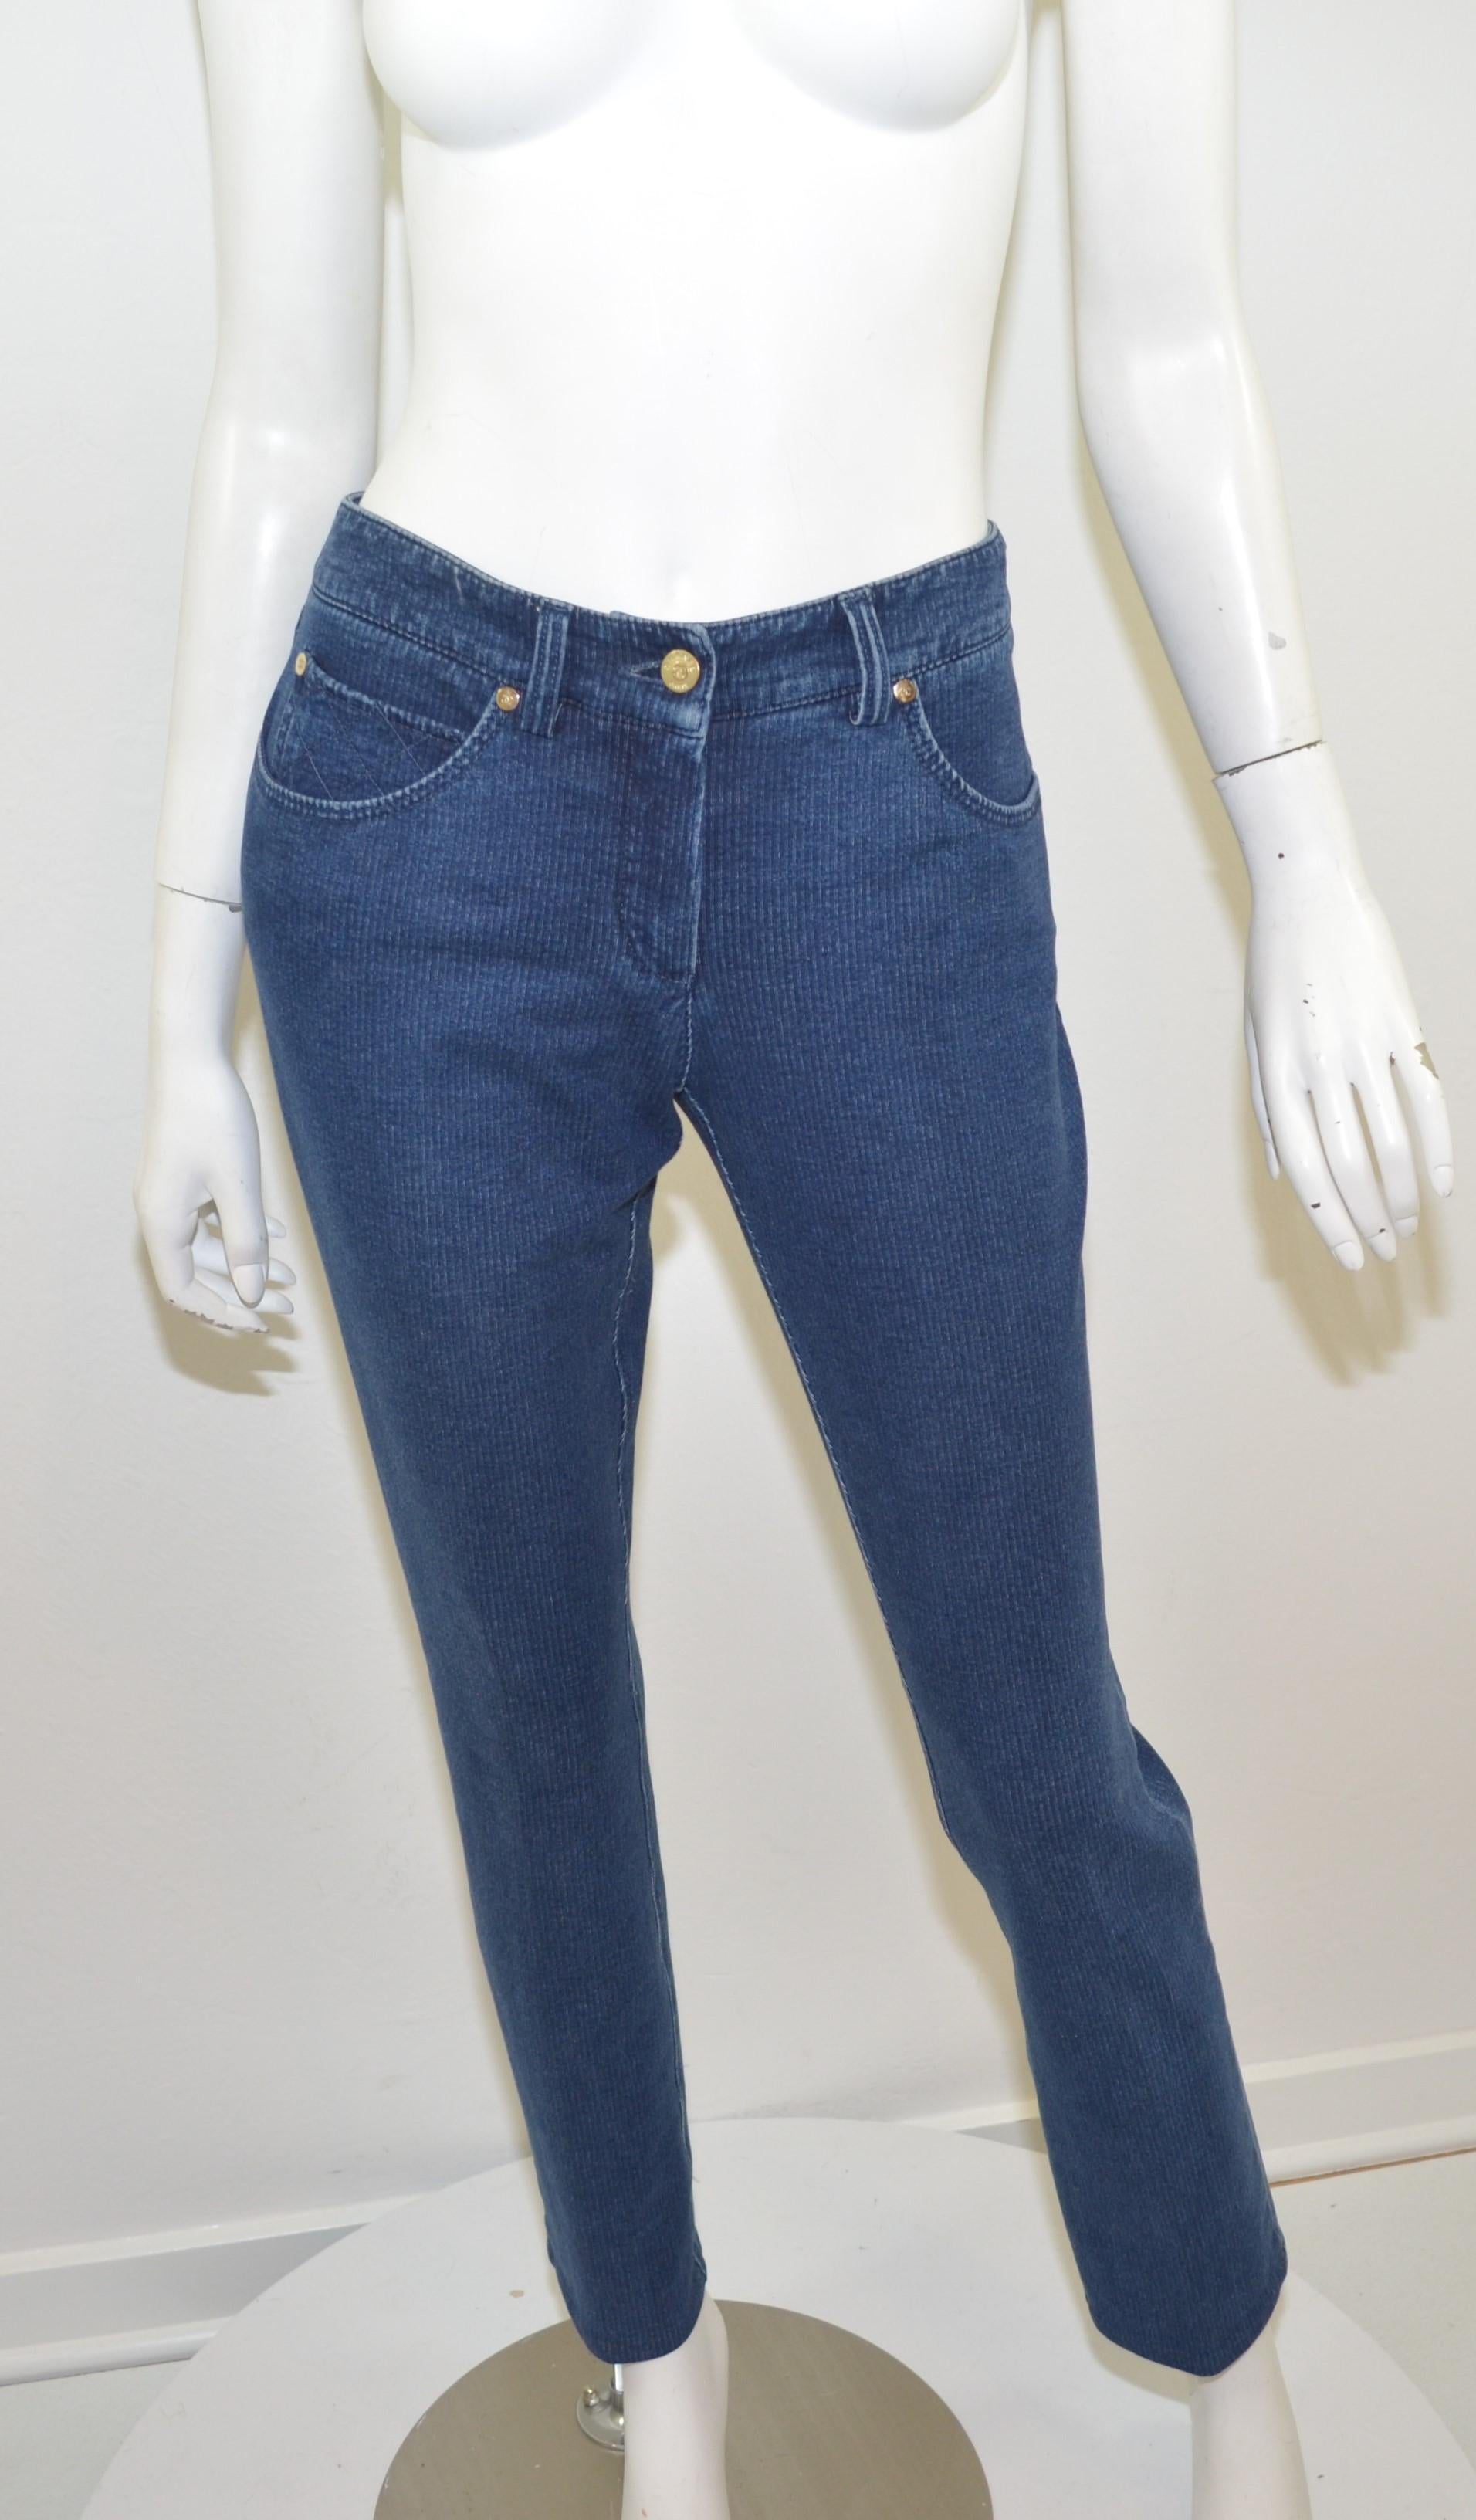 Chanel 2007 P denim pants composed with a cotton and spandex blend, button and zipper fastening, and functional front and back pockets. Pants are a size 40, made in France. 

Waist 32''
Hips 40''
Rise 9''
Inseam 29.5'' 
Length 39''